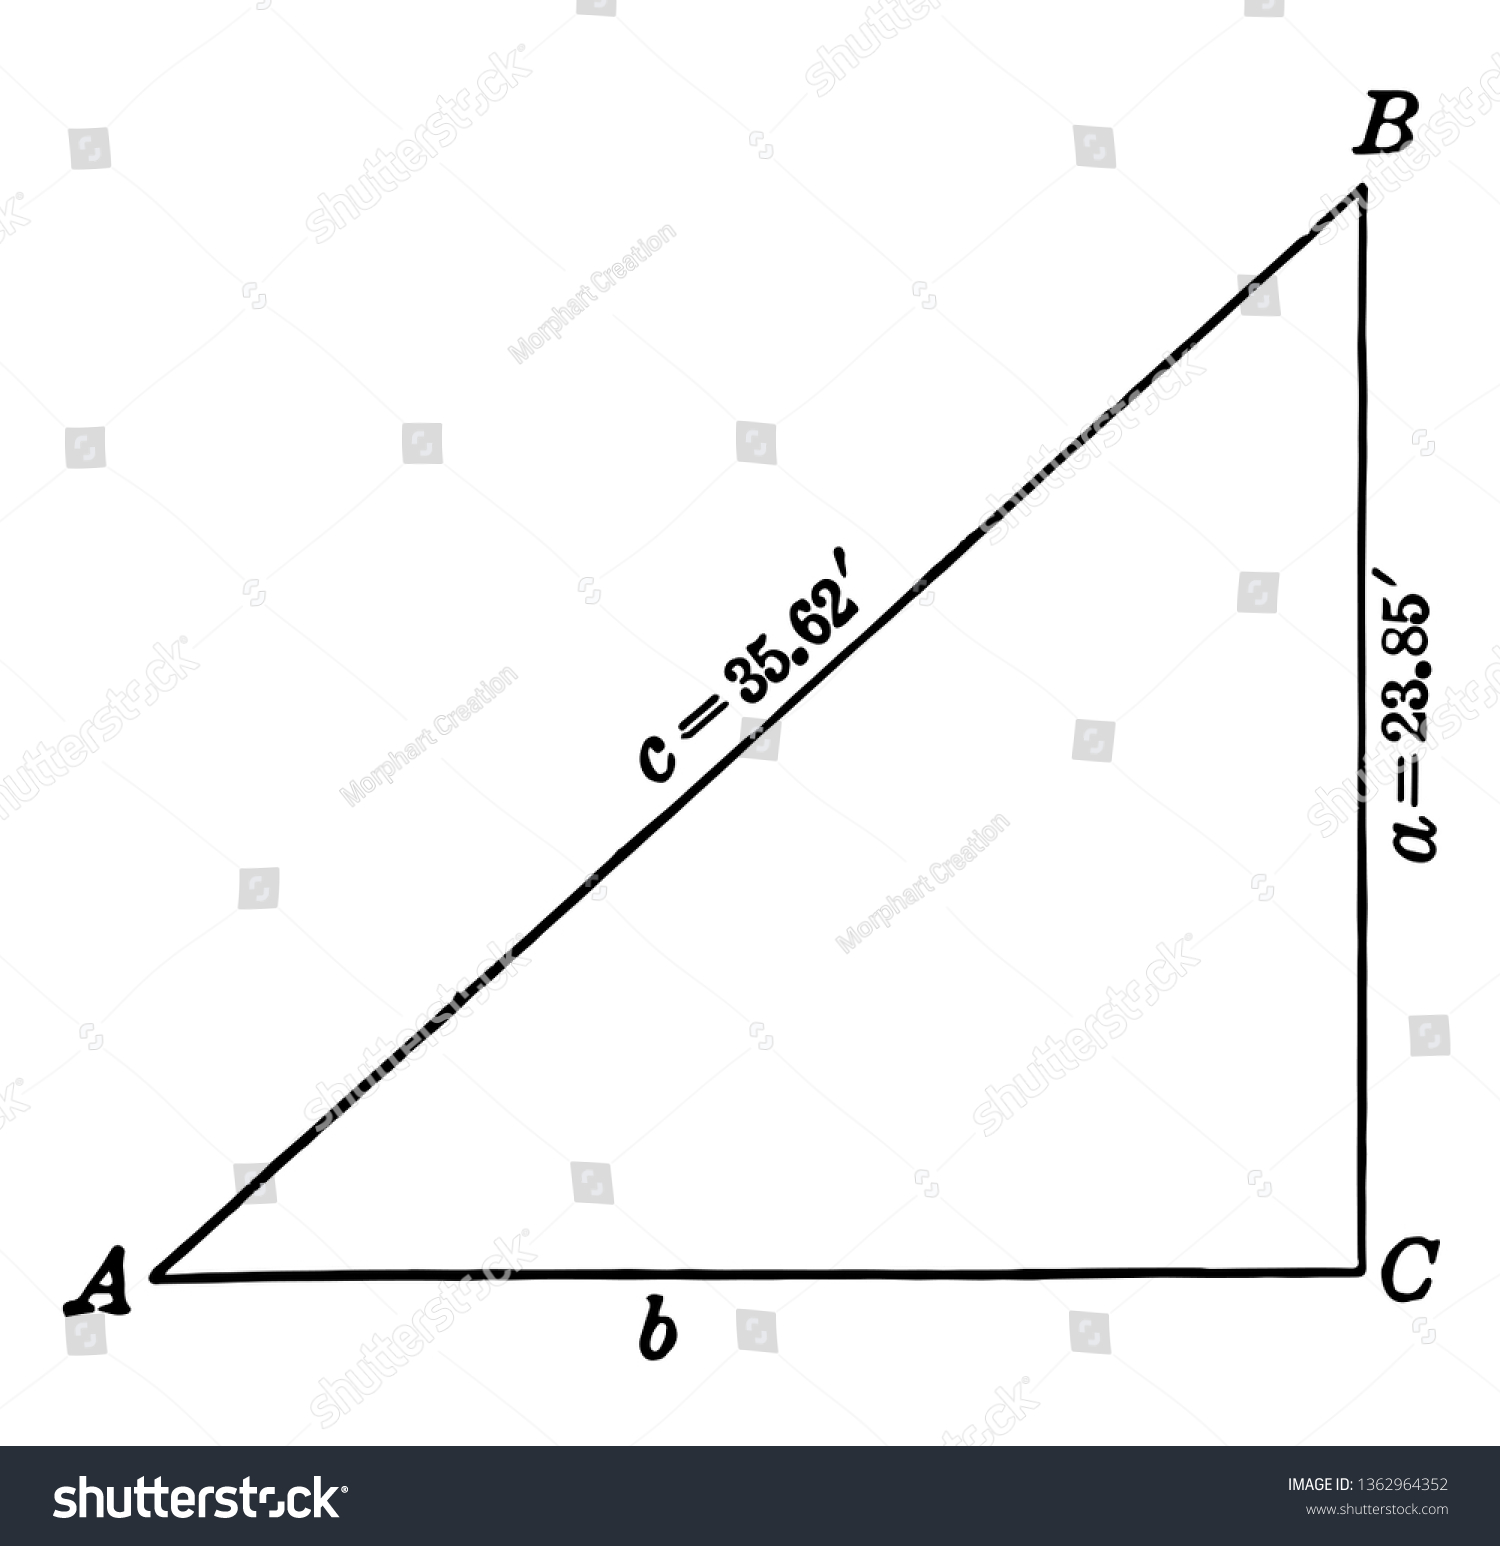 Image Shows Right Triangle Abc That Stock Vector Royalty Free 1362964352 Shutterstock 7699